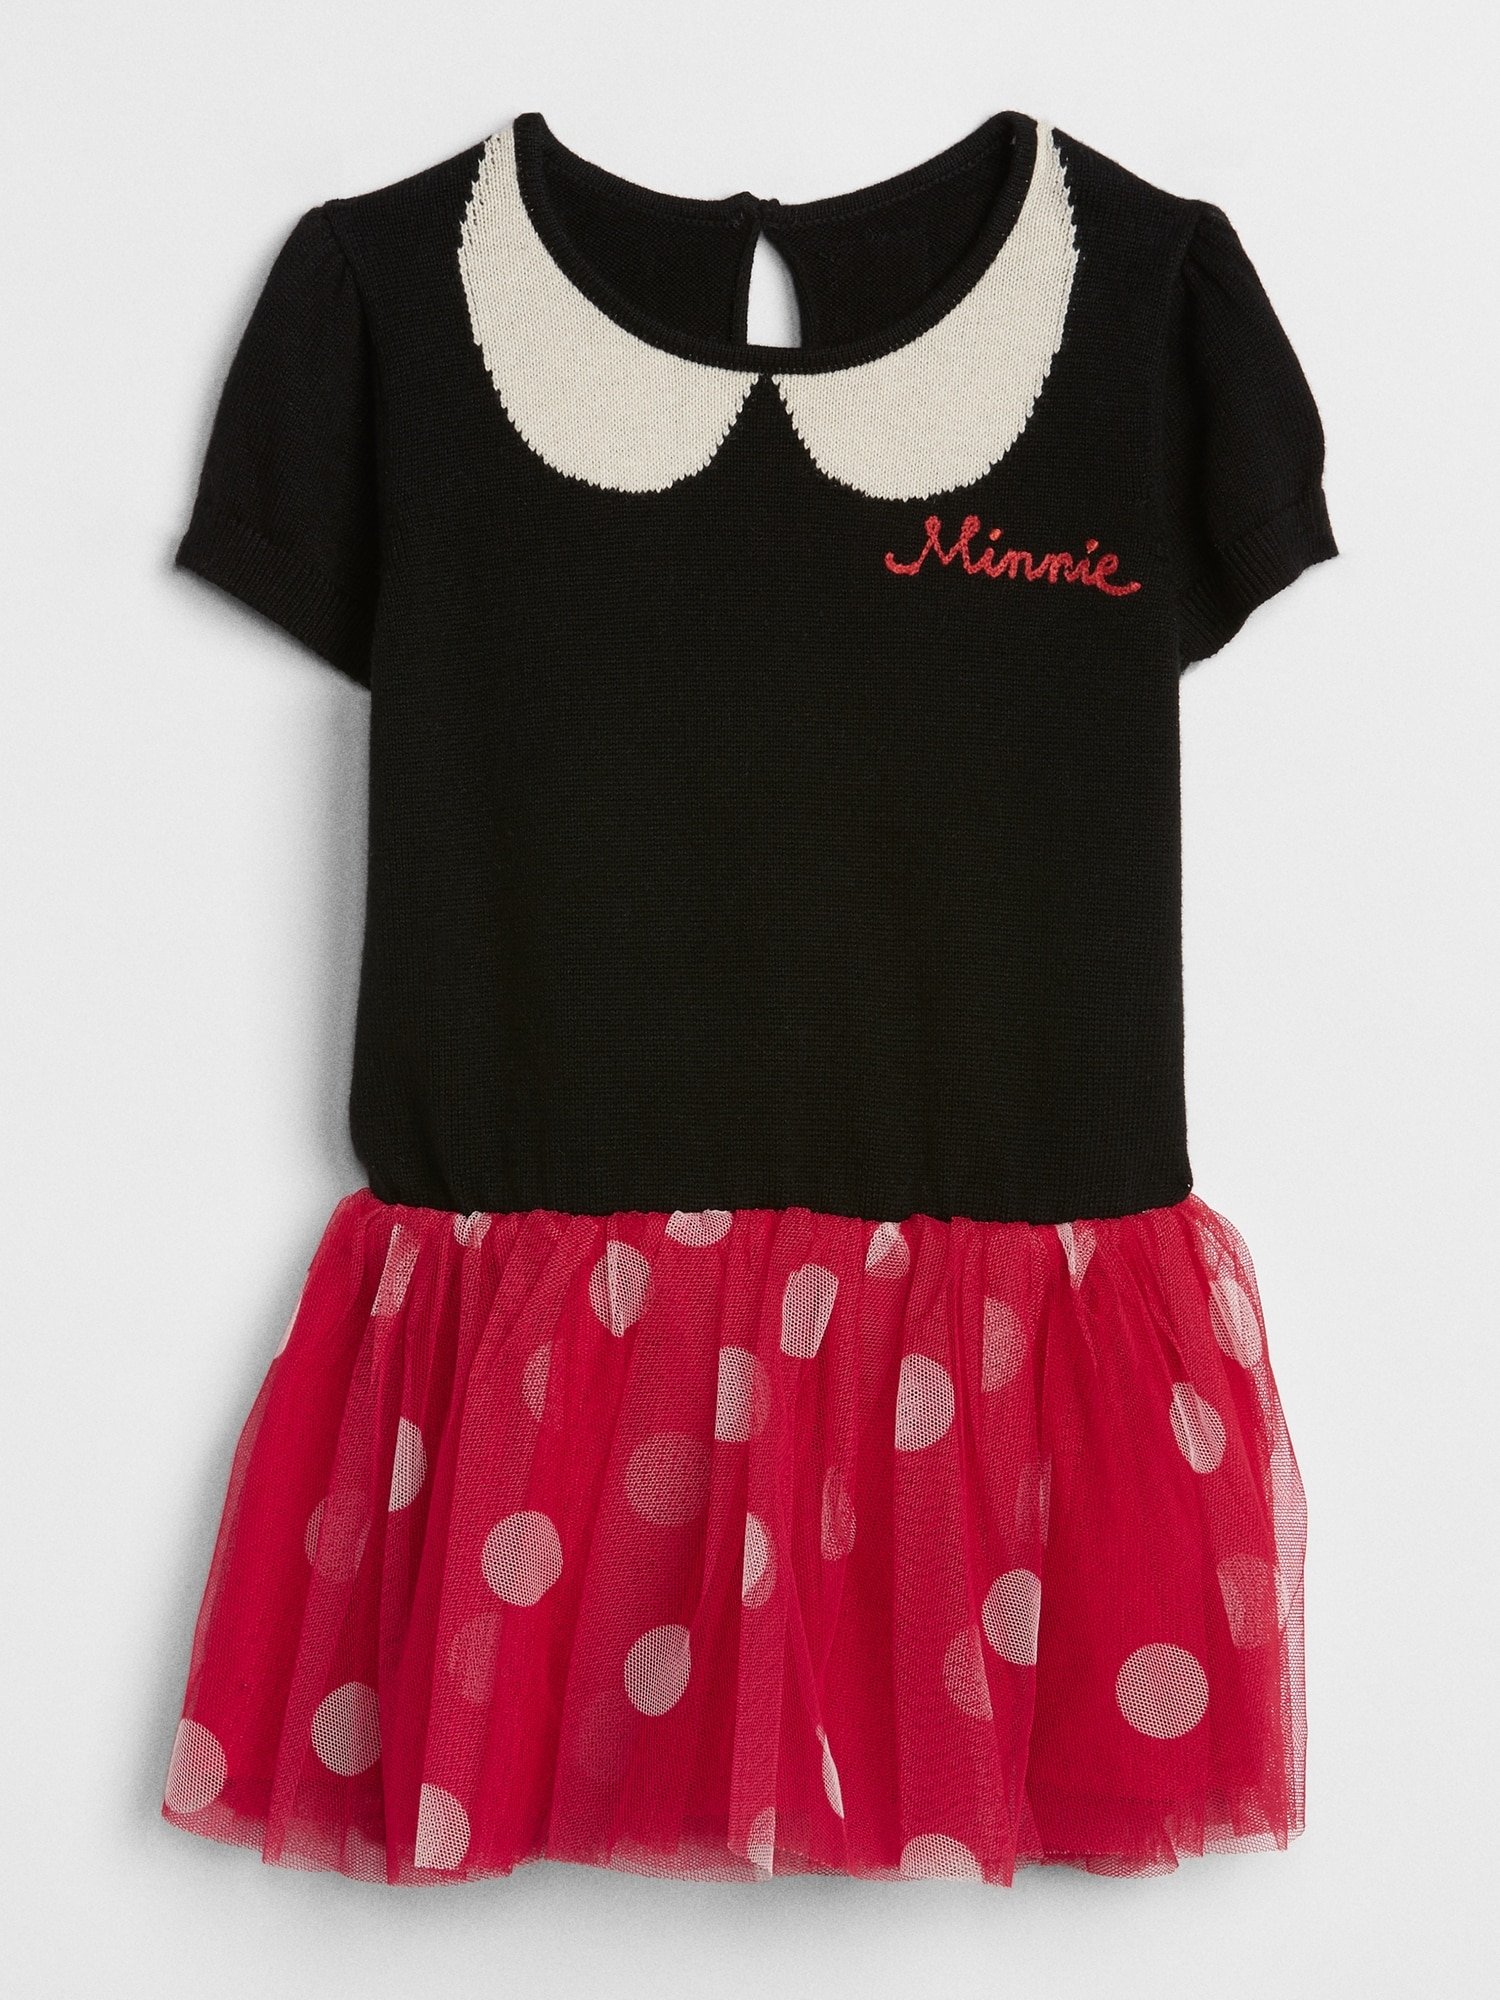 babyGap | Disney Minnie Mouse Elbise product image